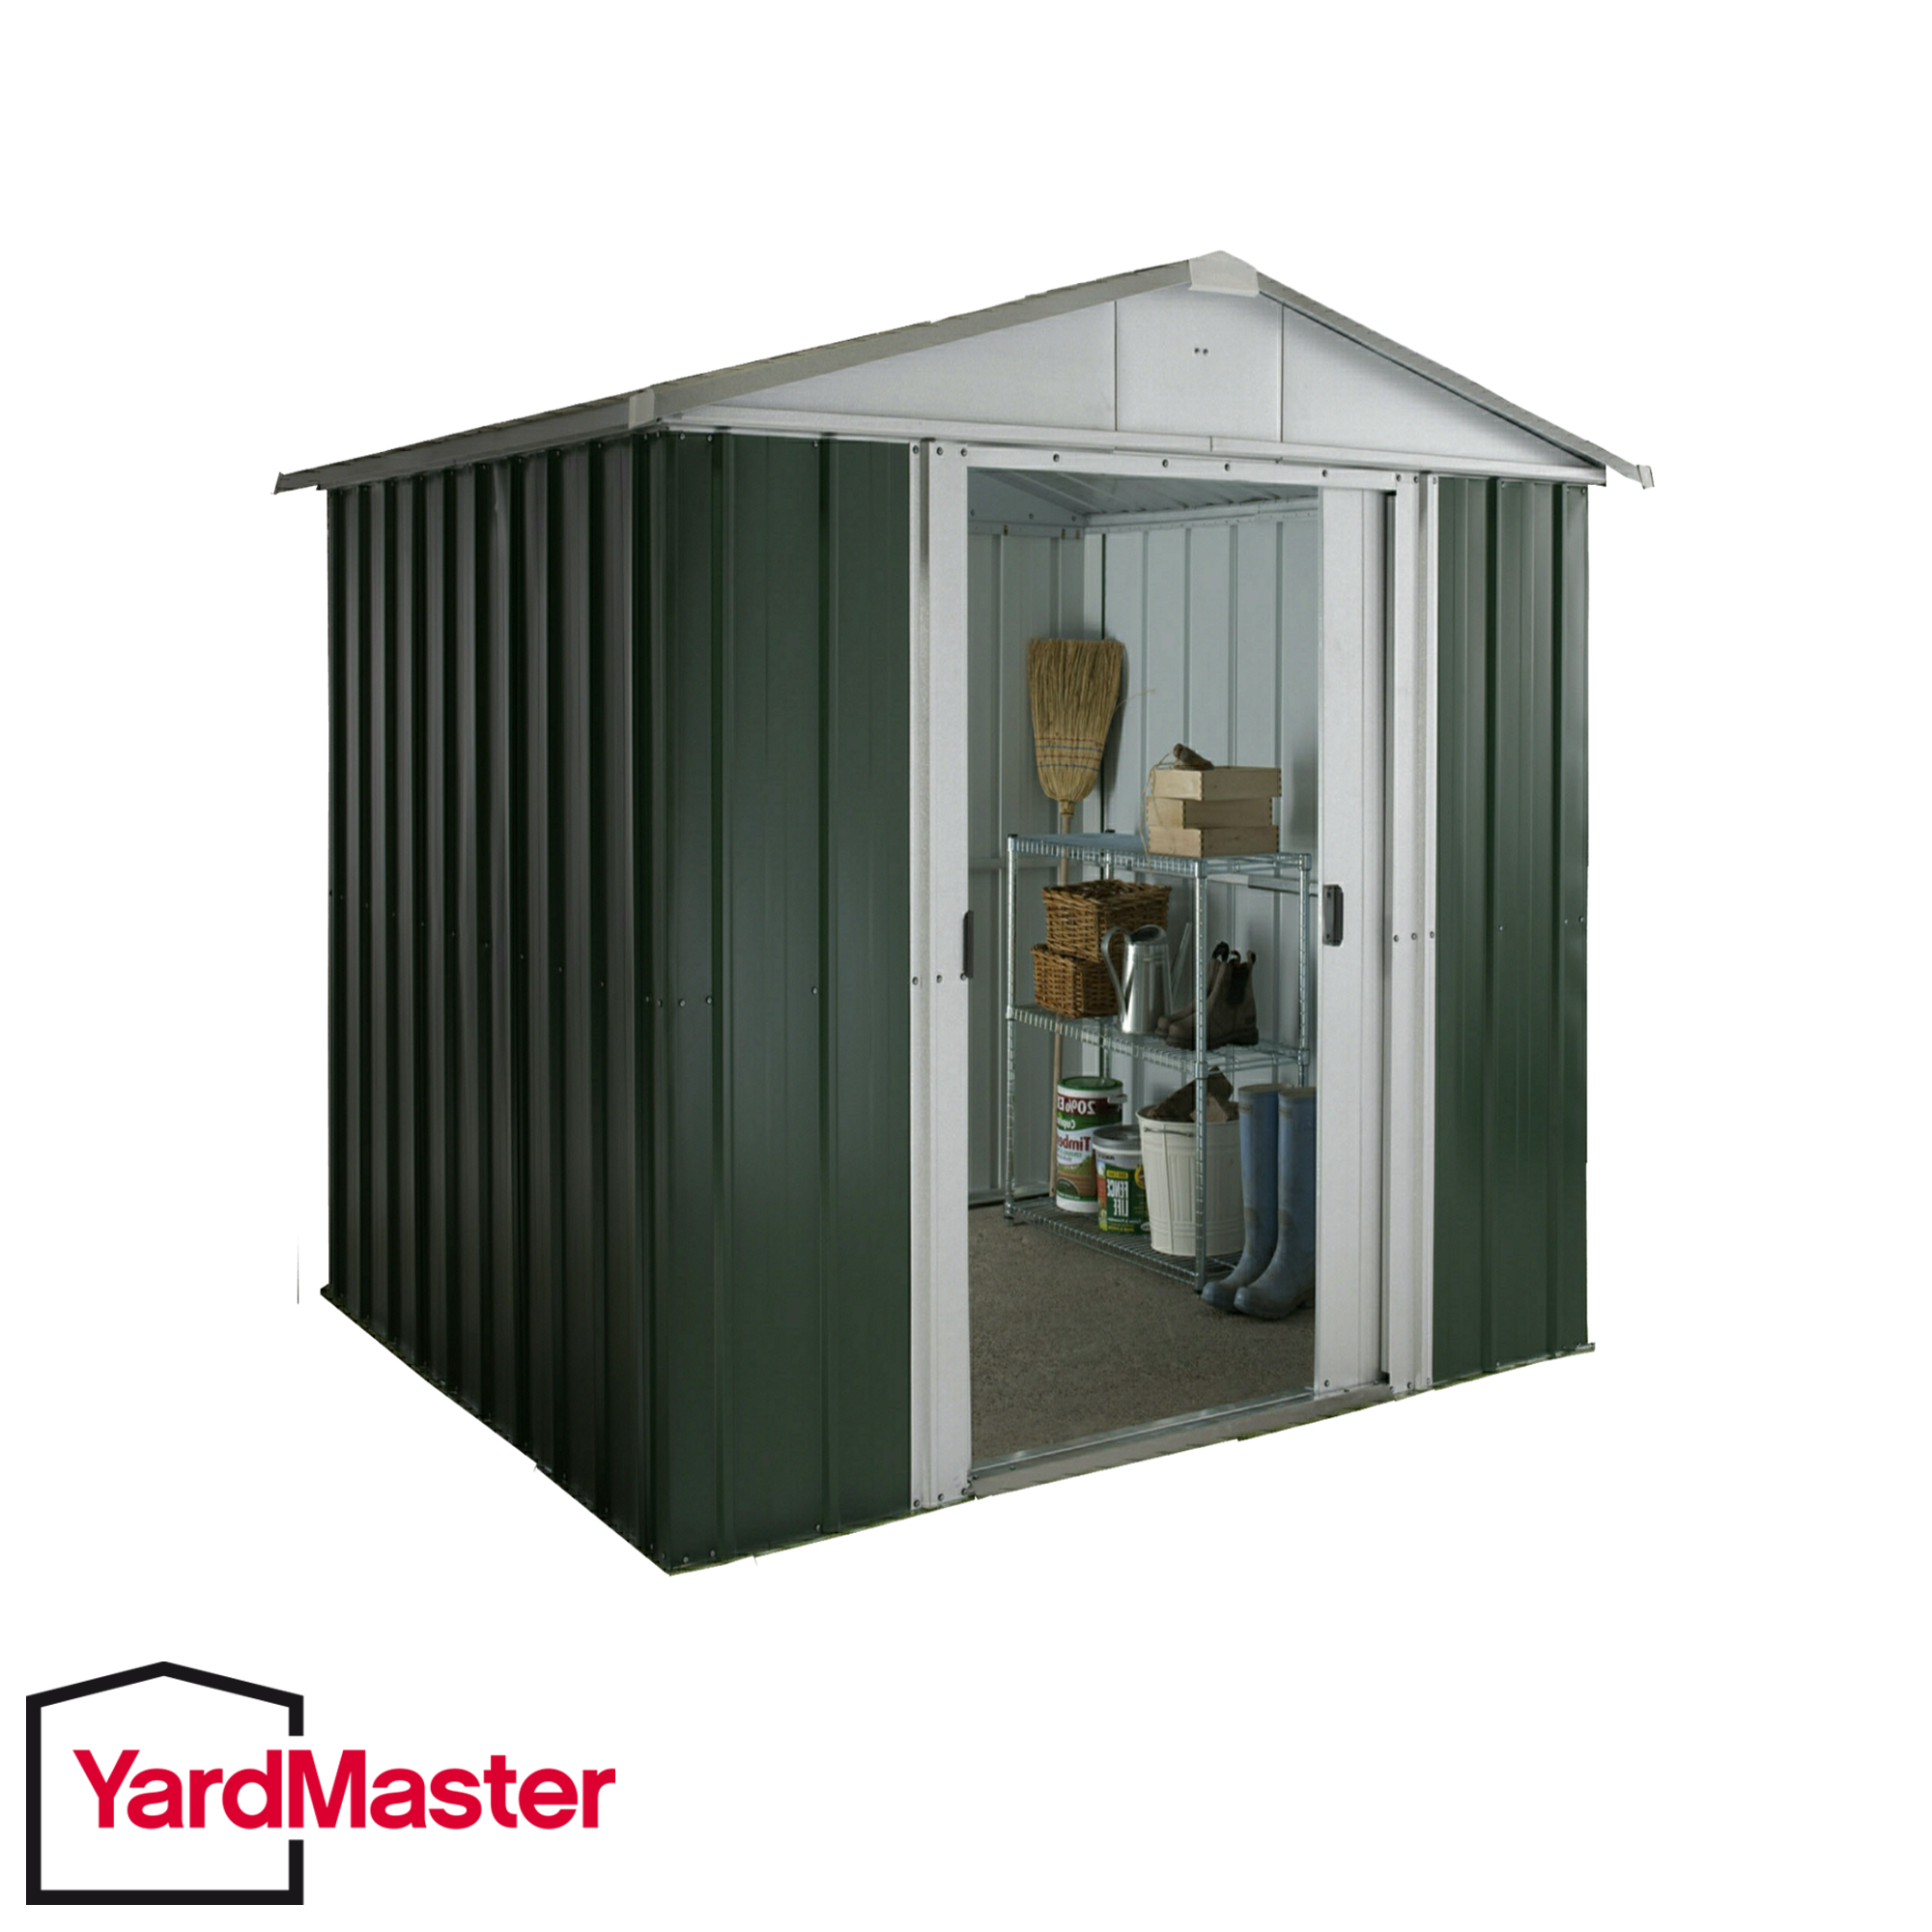 Featured image for “YardMaster 6x7 GEYZ Emerald Deluxe Apex Metal Shed”